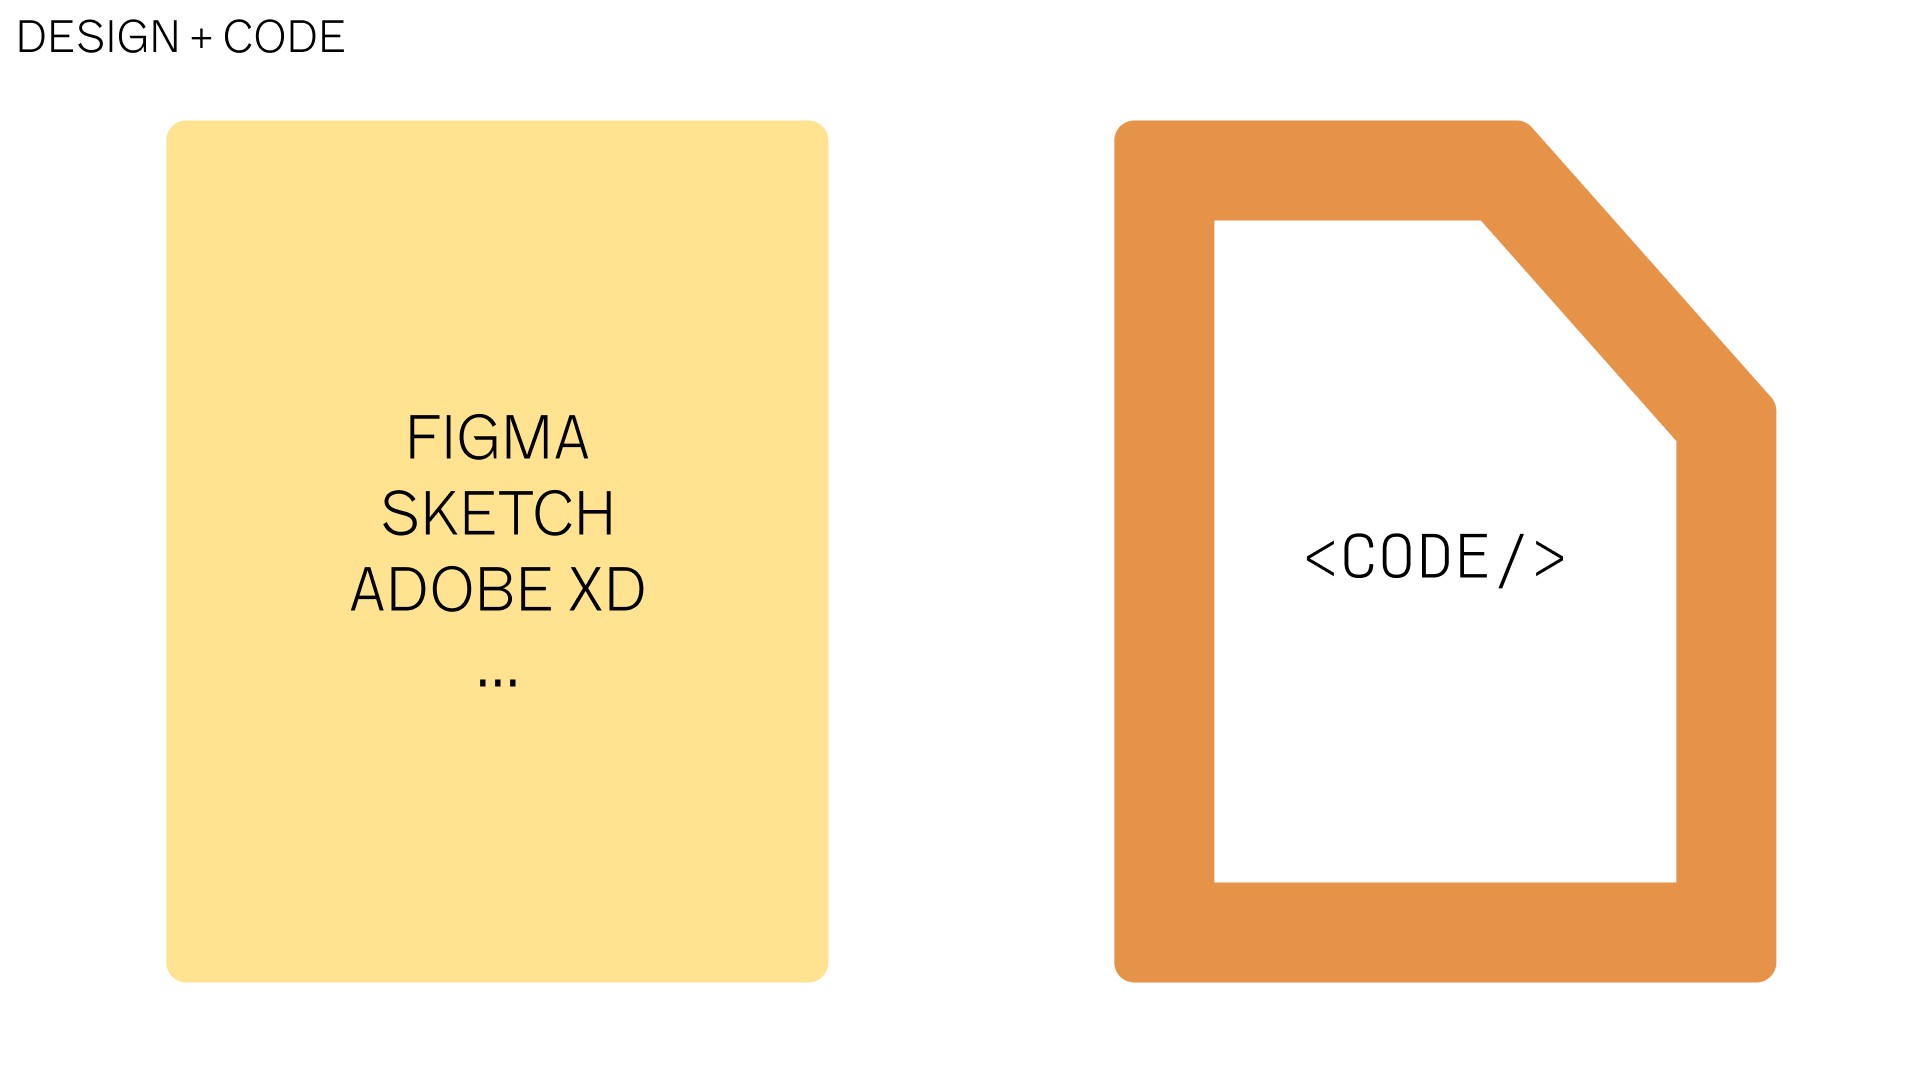 Two different mediums: design tools (figma, sketch, adobe xd) and code.